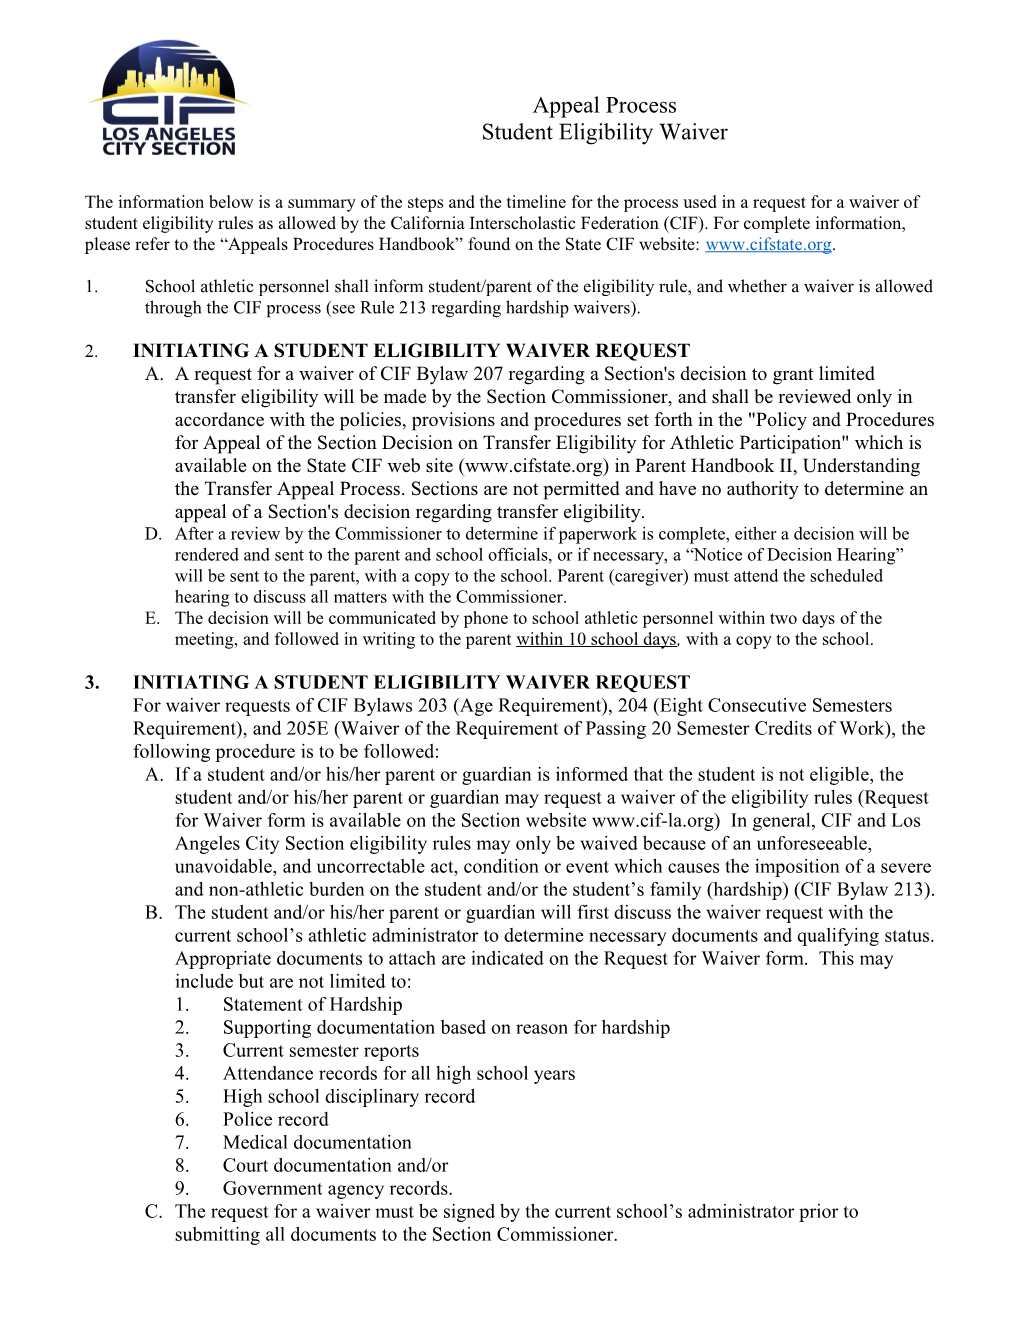 2. Initiating a Student Eligibility Waiver Request